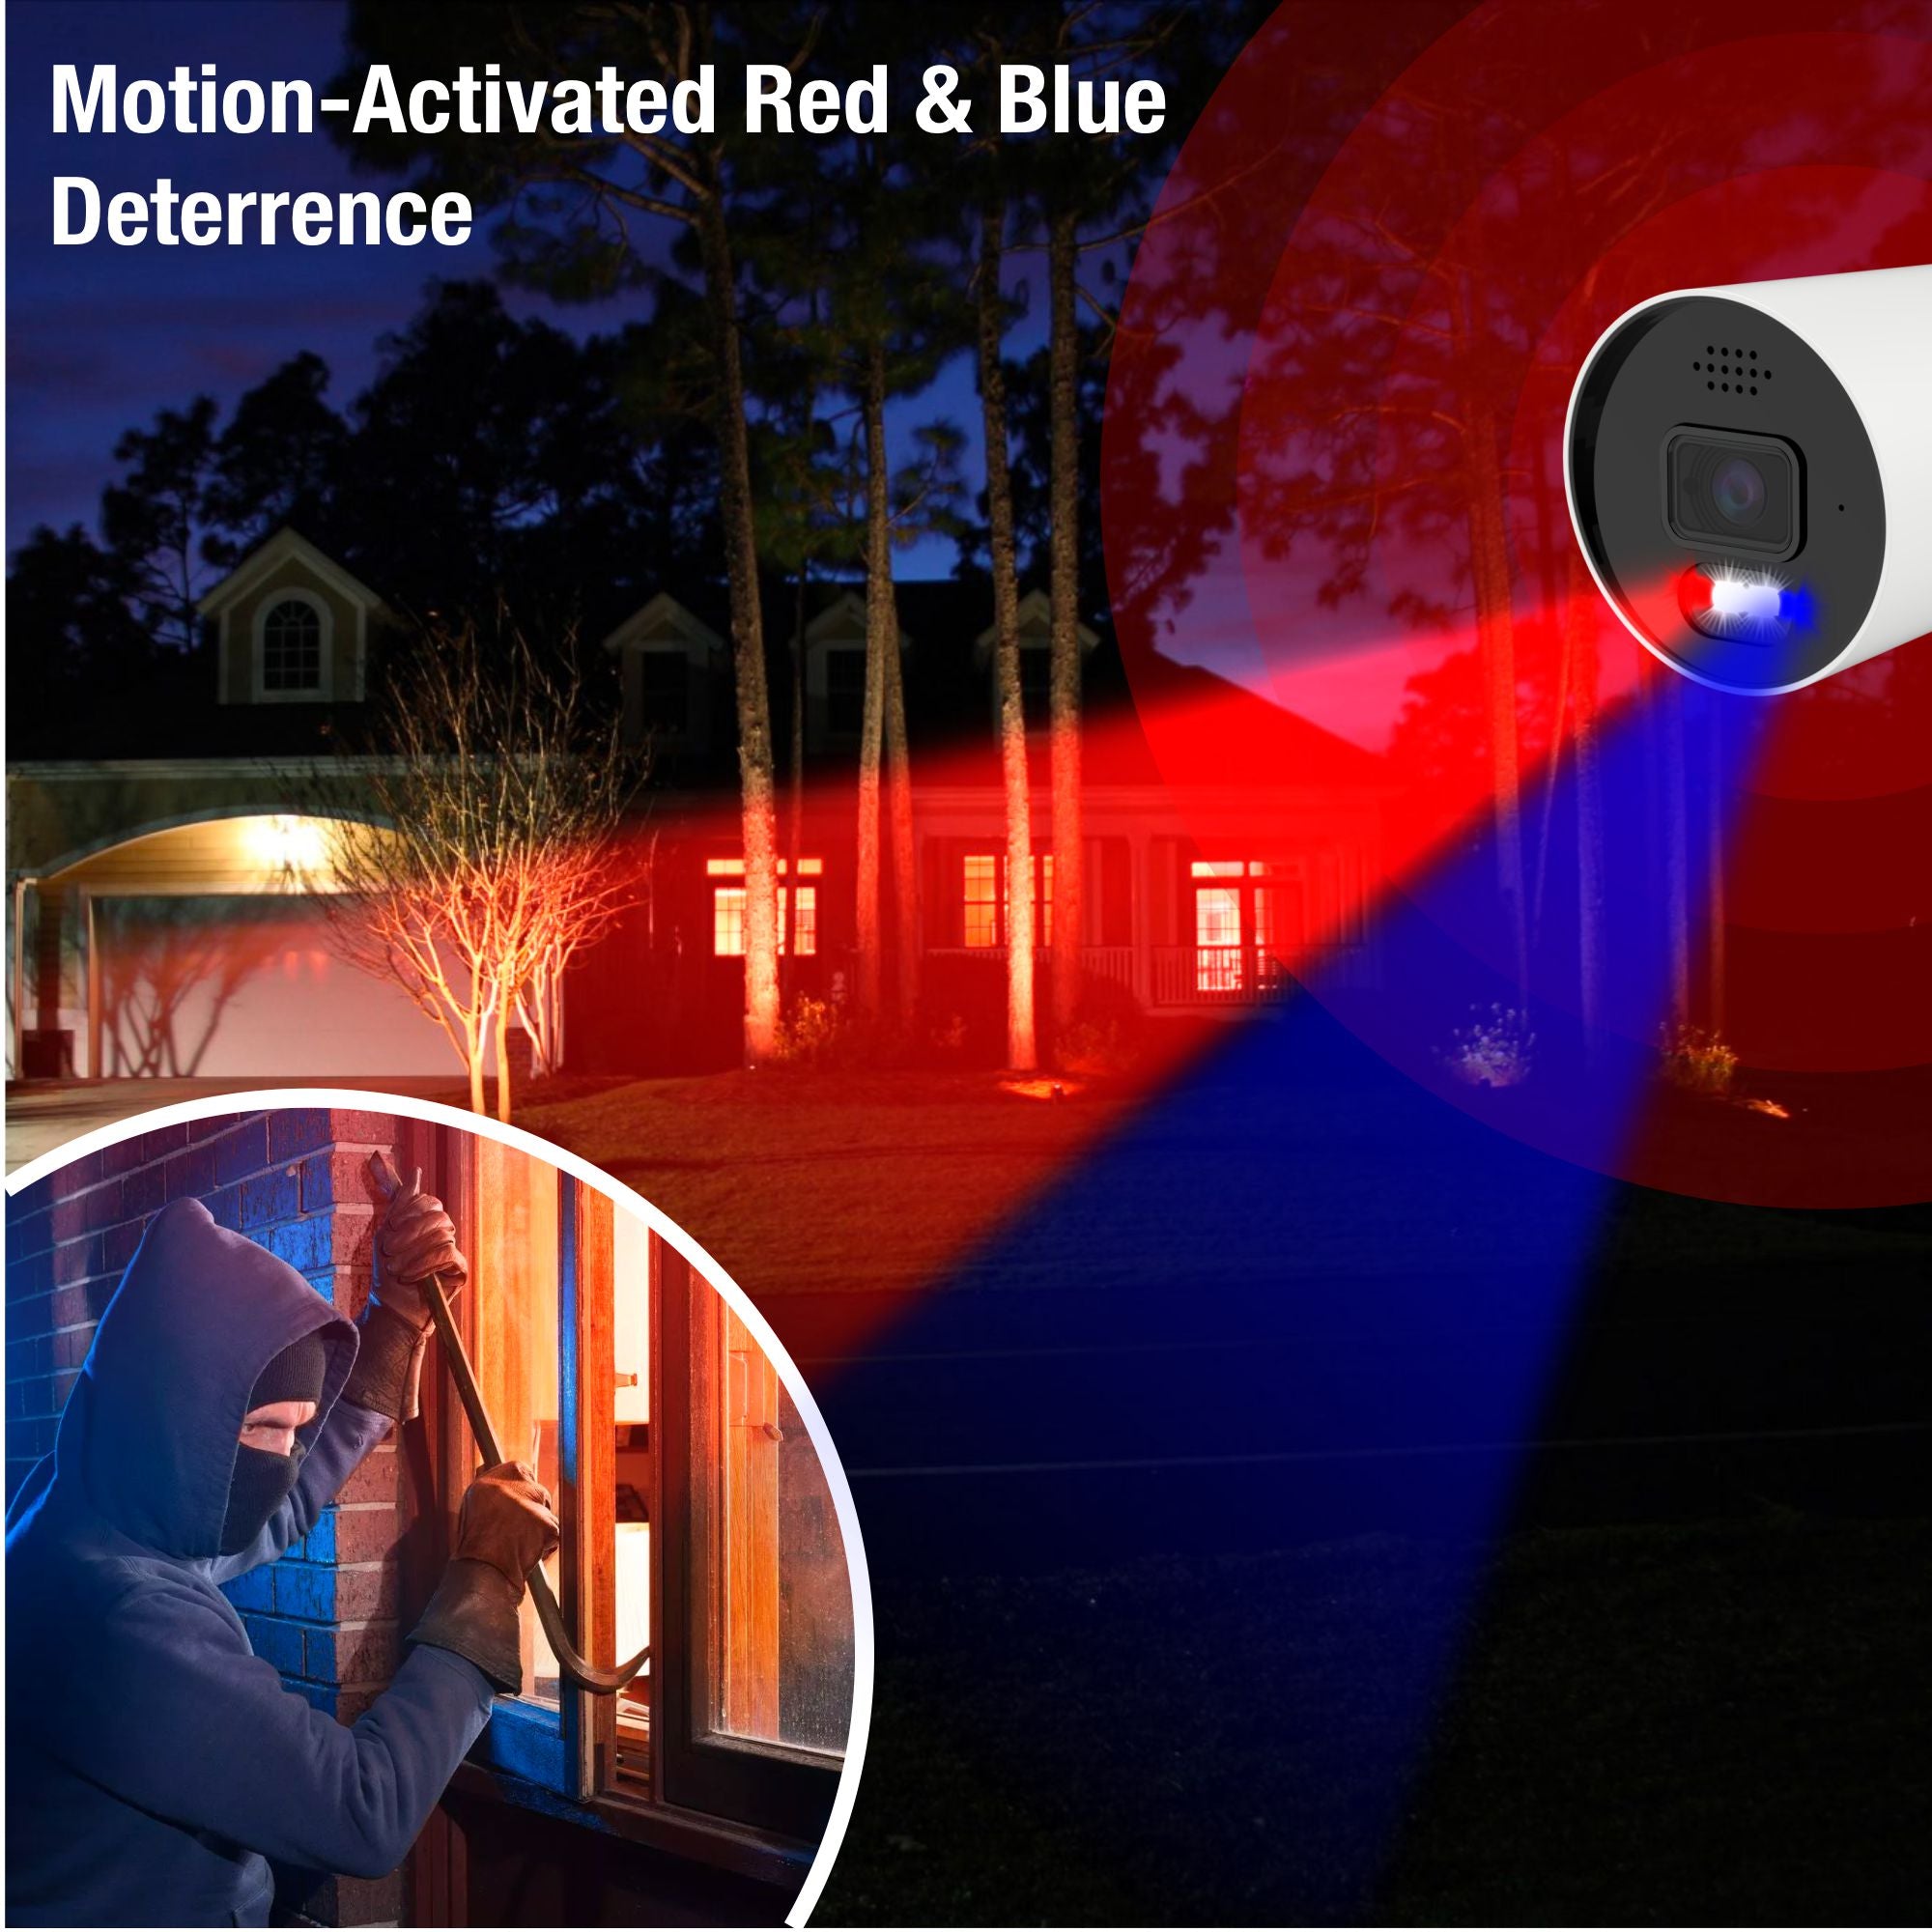 Security Camera with Red and Blue Deterrence